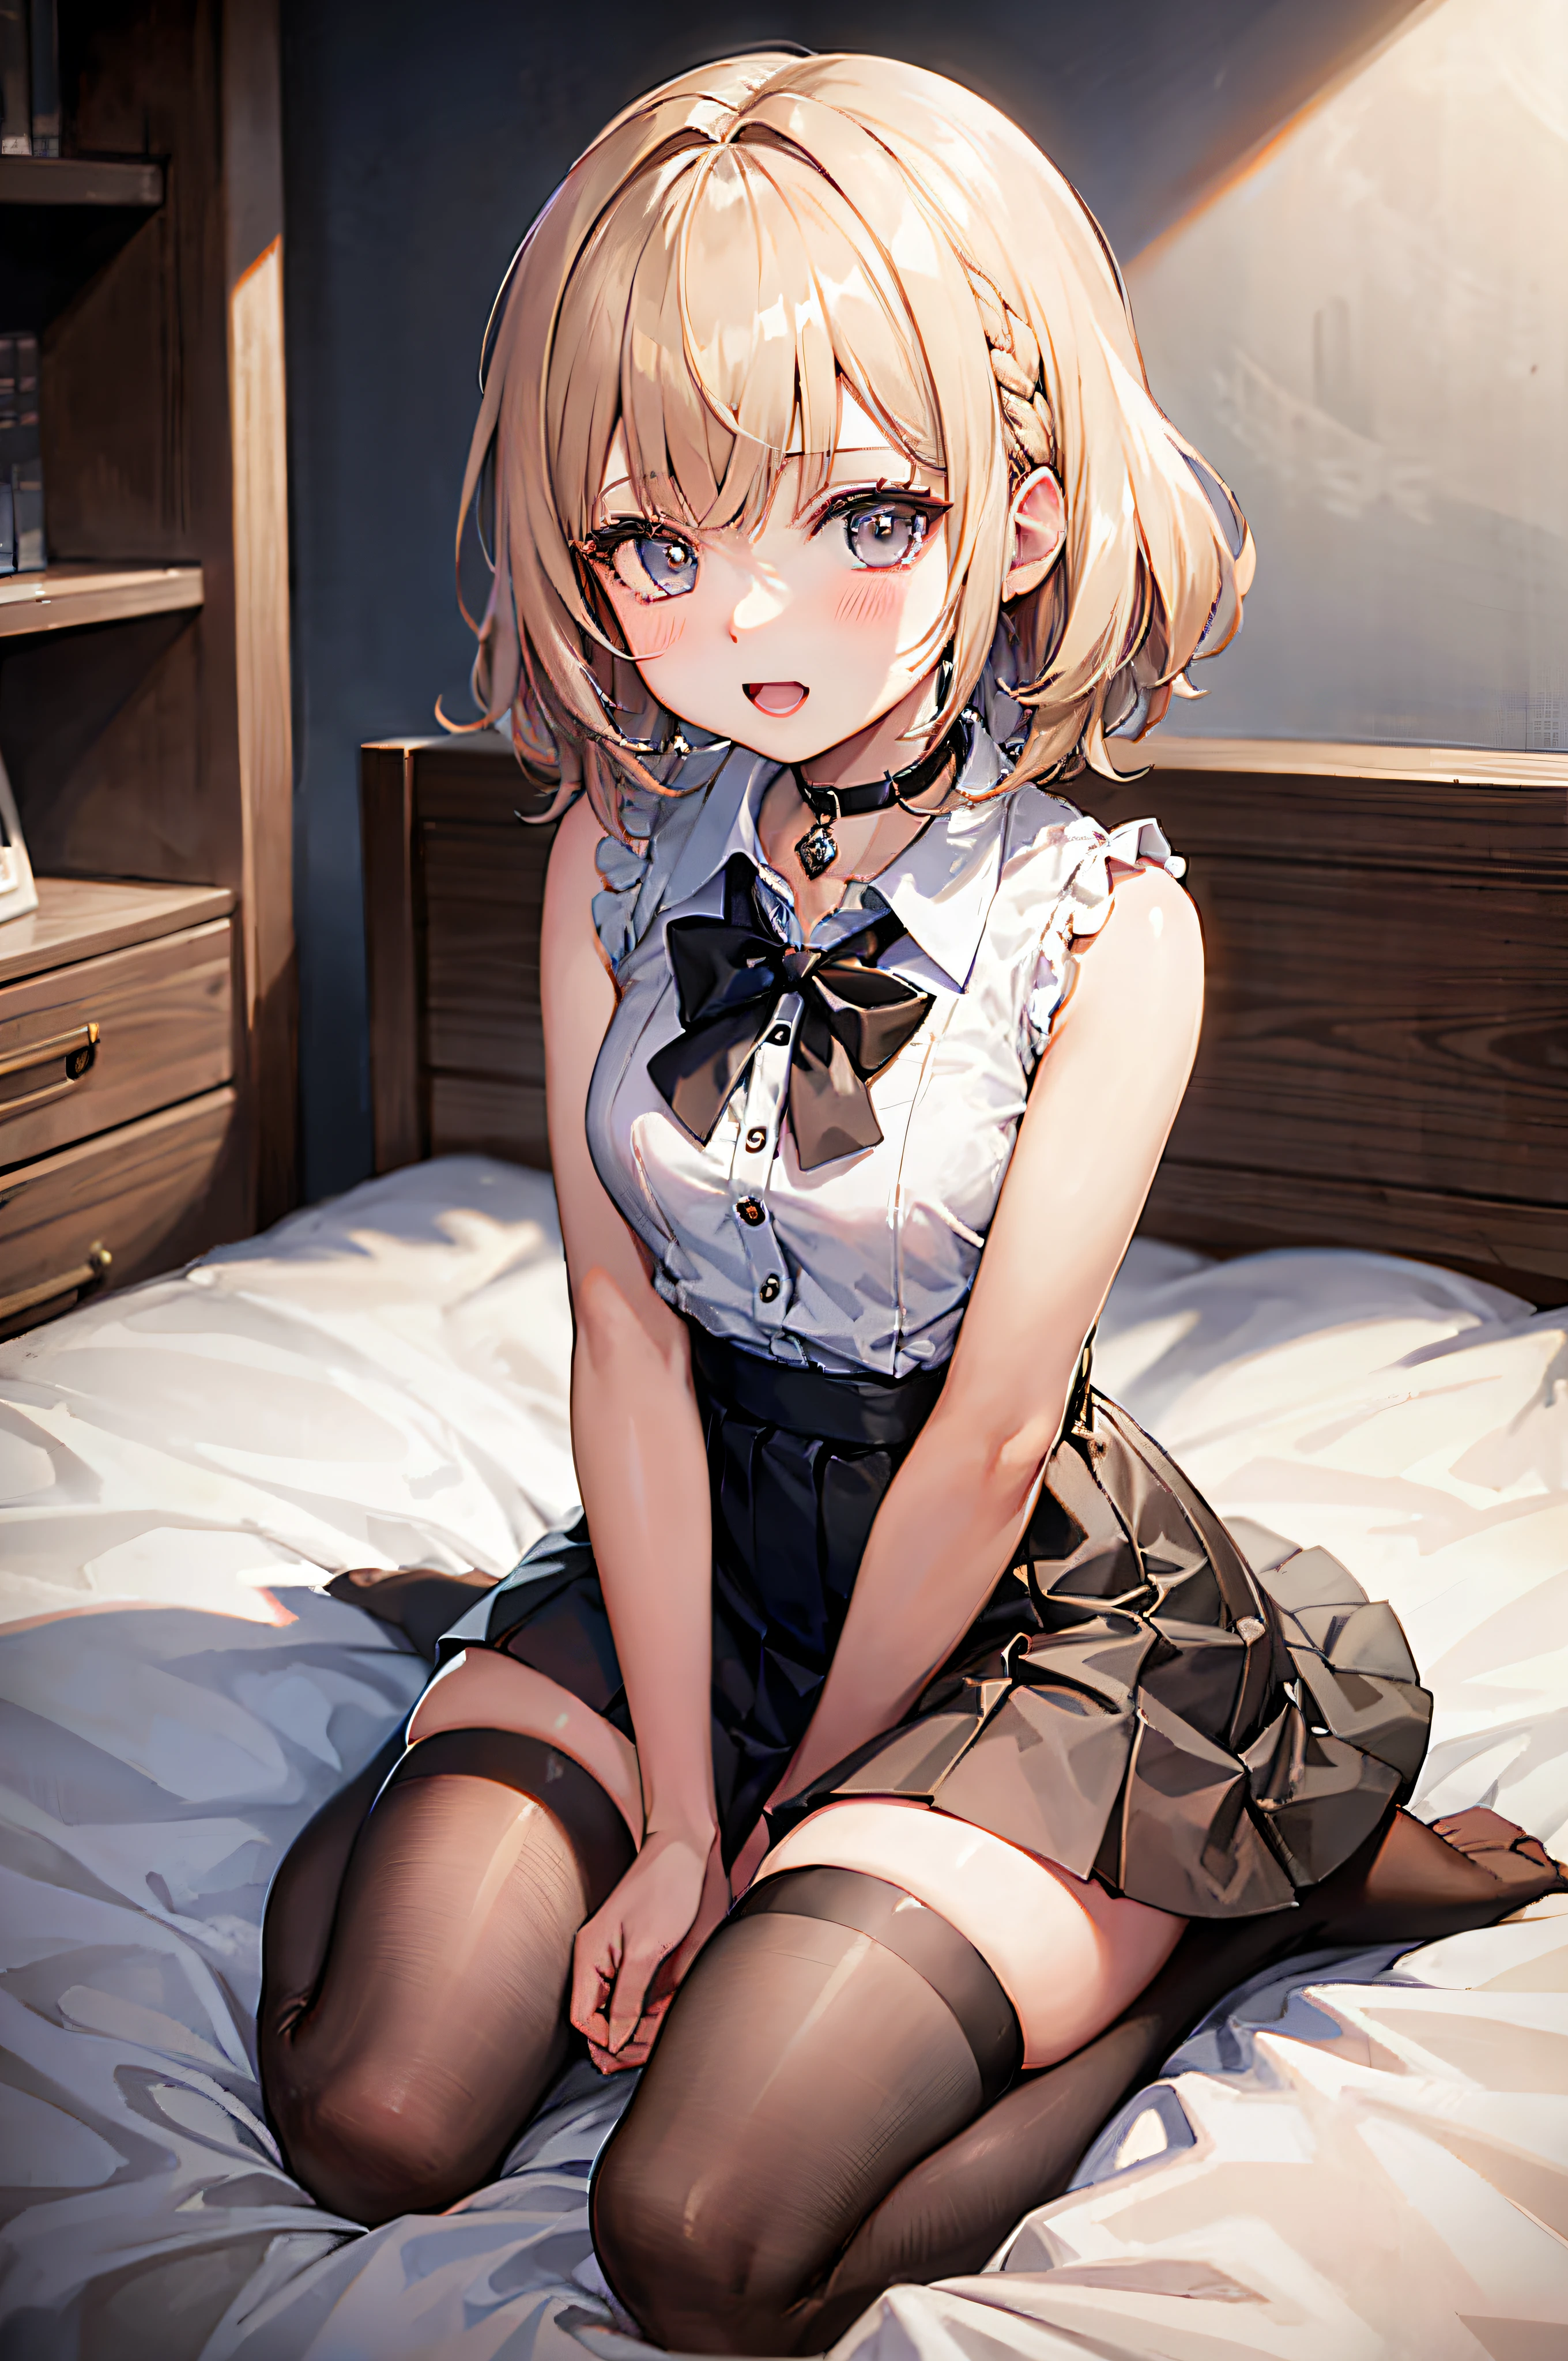 Anime - style image of a woman sitting on the bed in the room,  in a dress, surreal high school girl, seductive anime girl, surreal high school girl,  , Cute girl anime visual, cute anime girl, young anime girl, real high school girl, small details. girl frontline